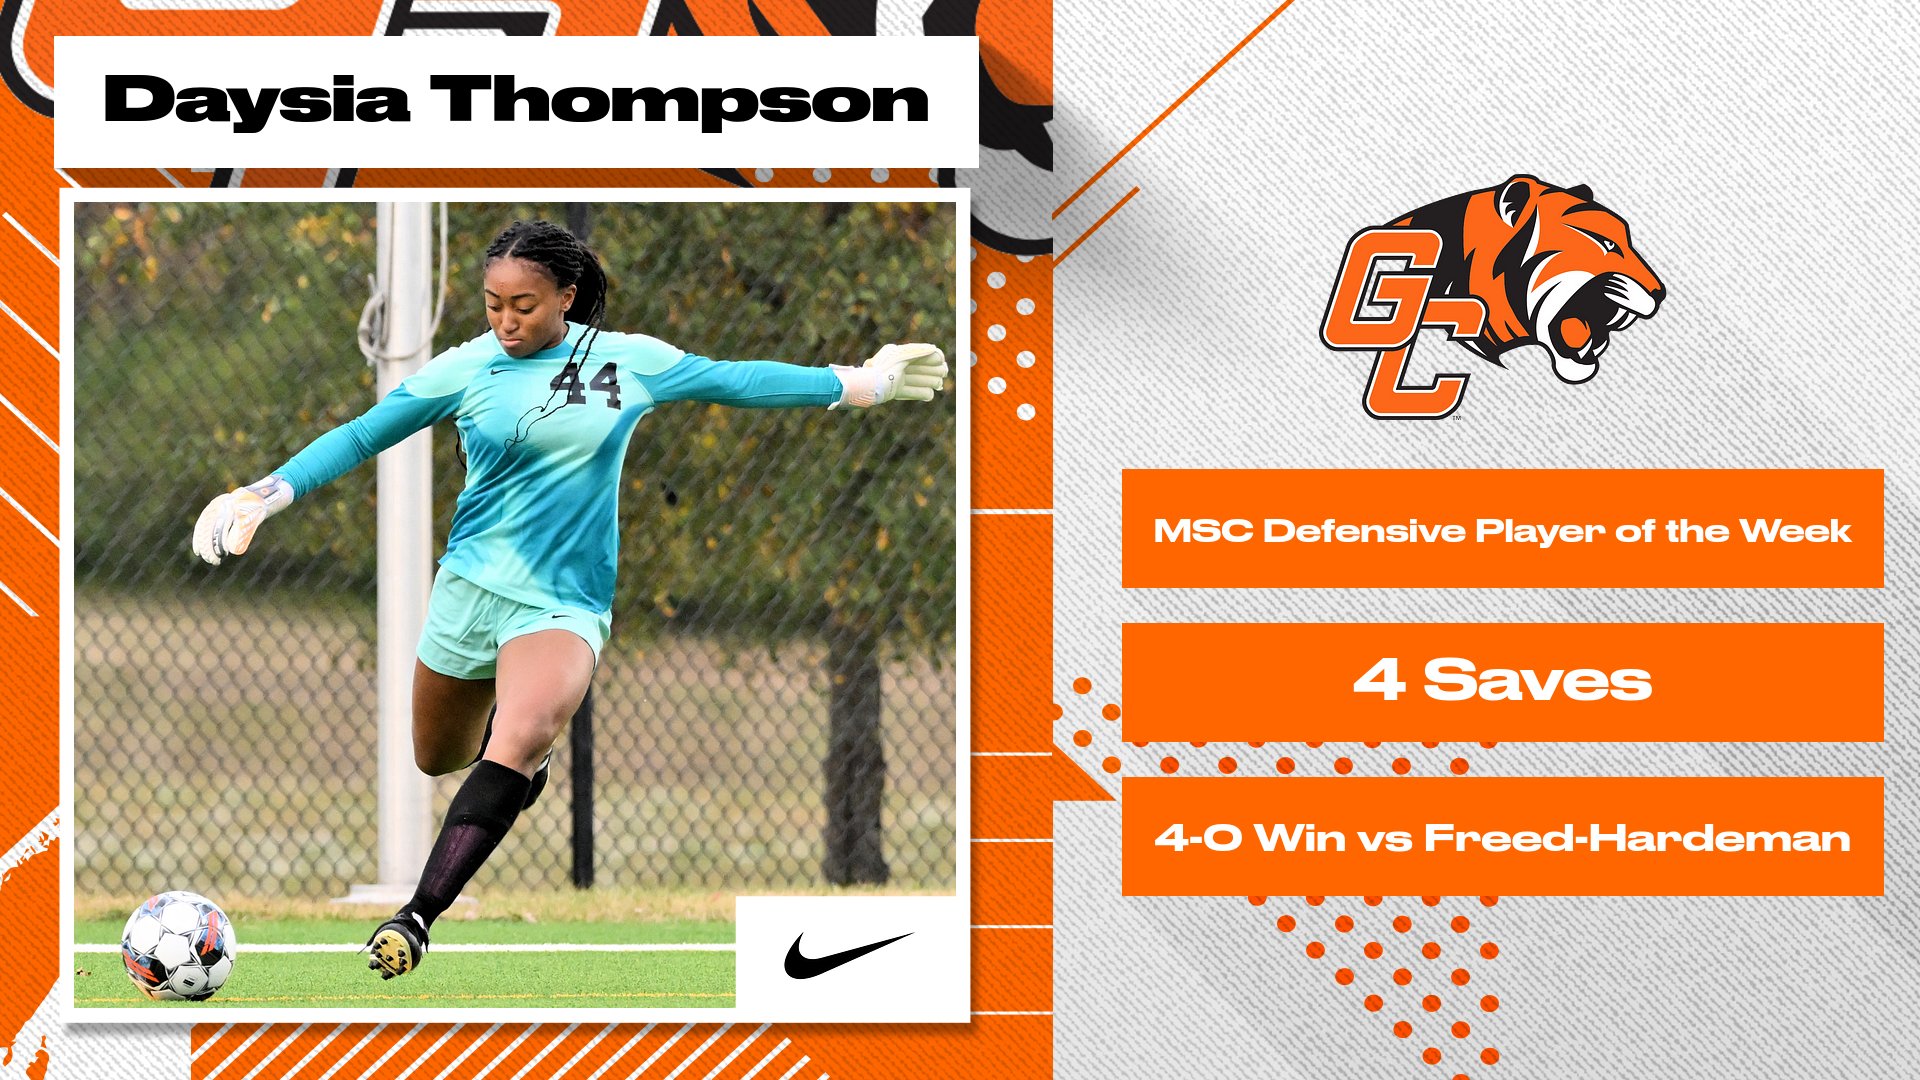 Thompson named MSC Defensive Player of the Week